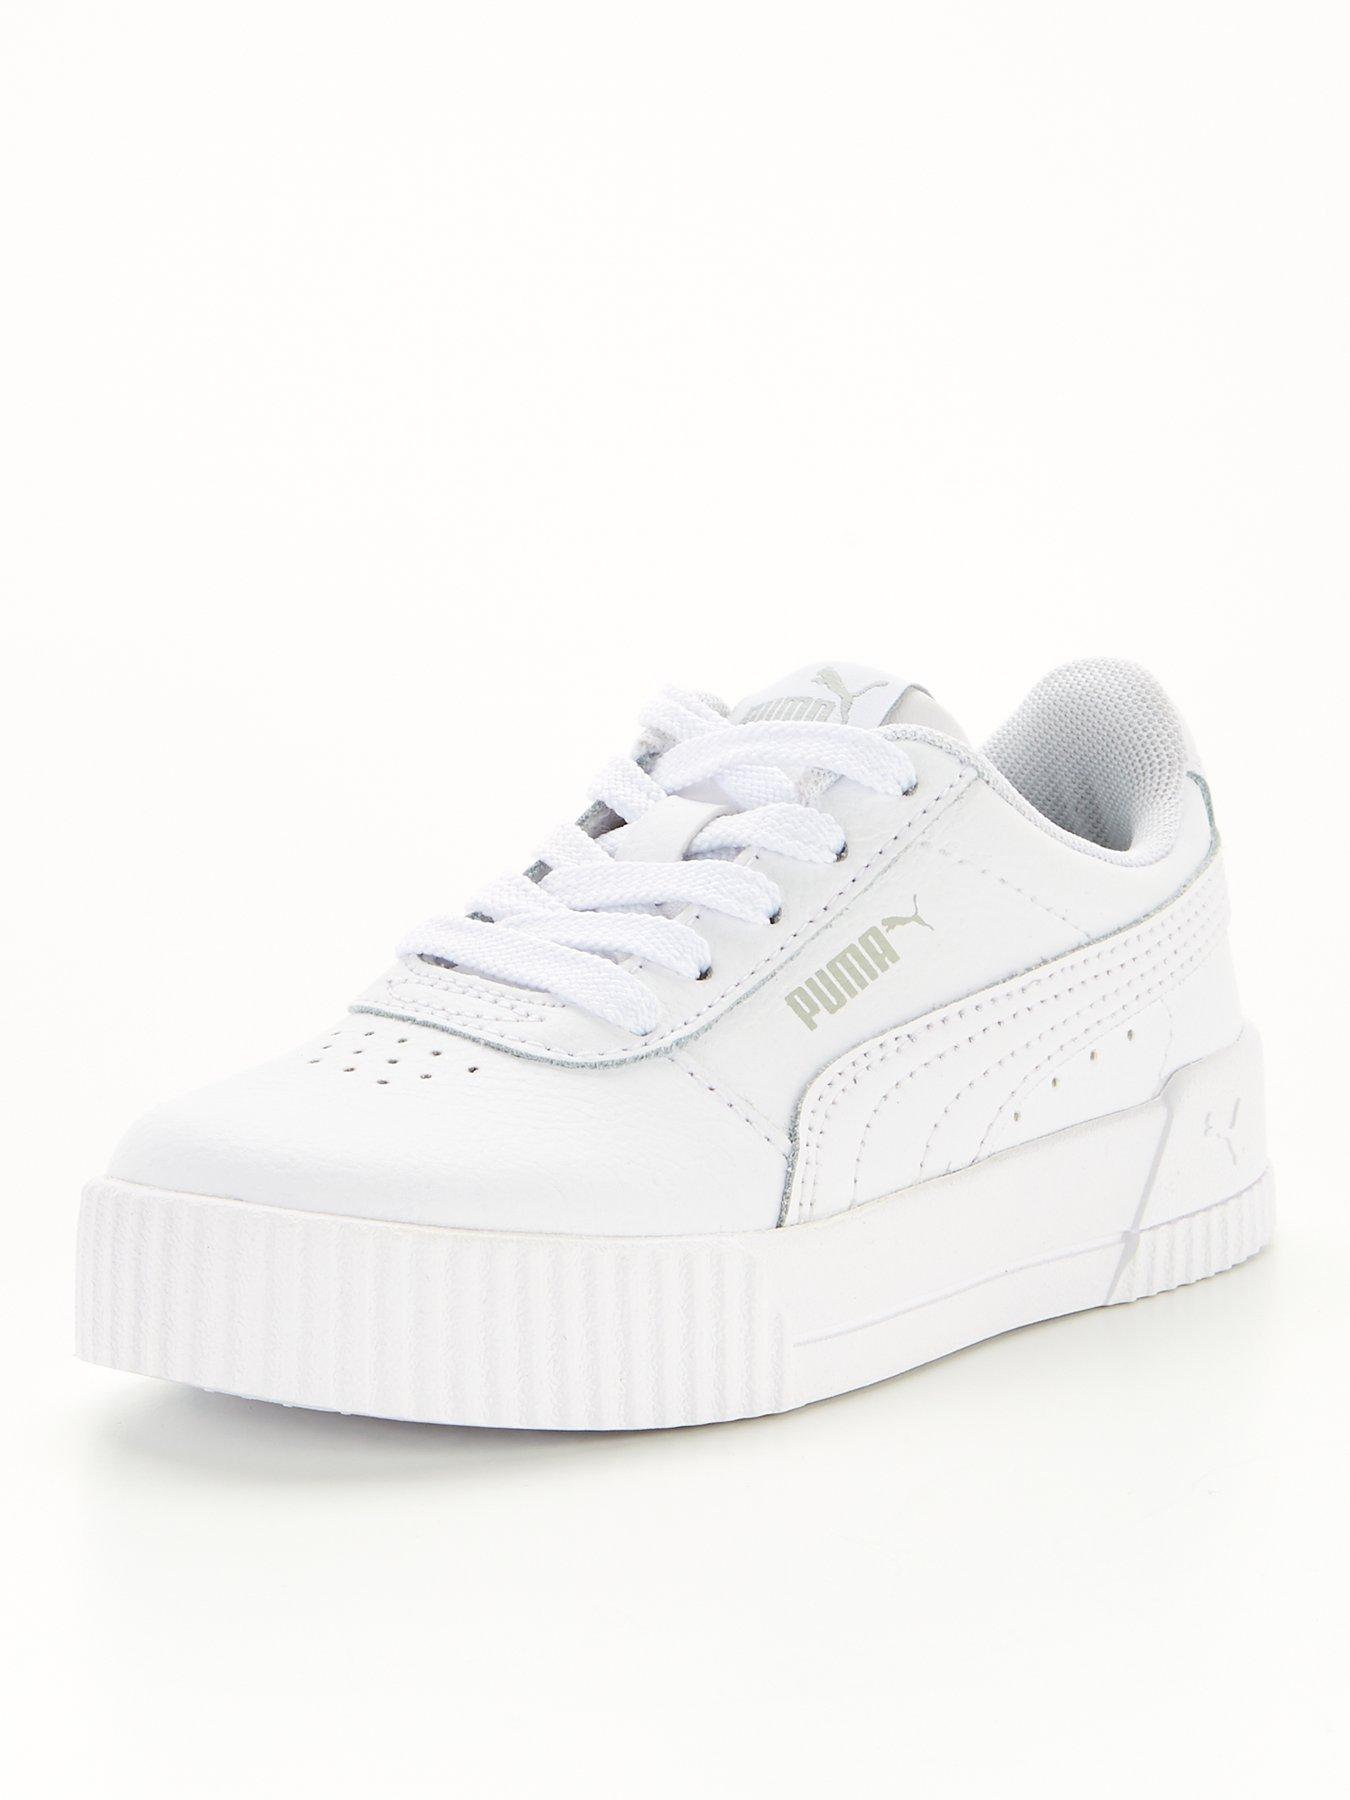 littlewoods girls trainers